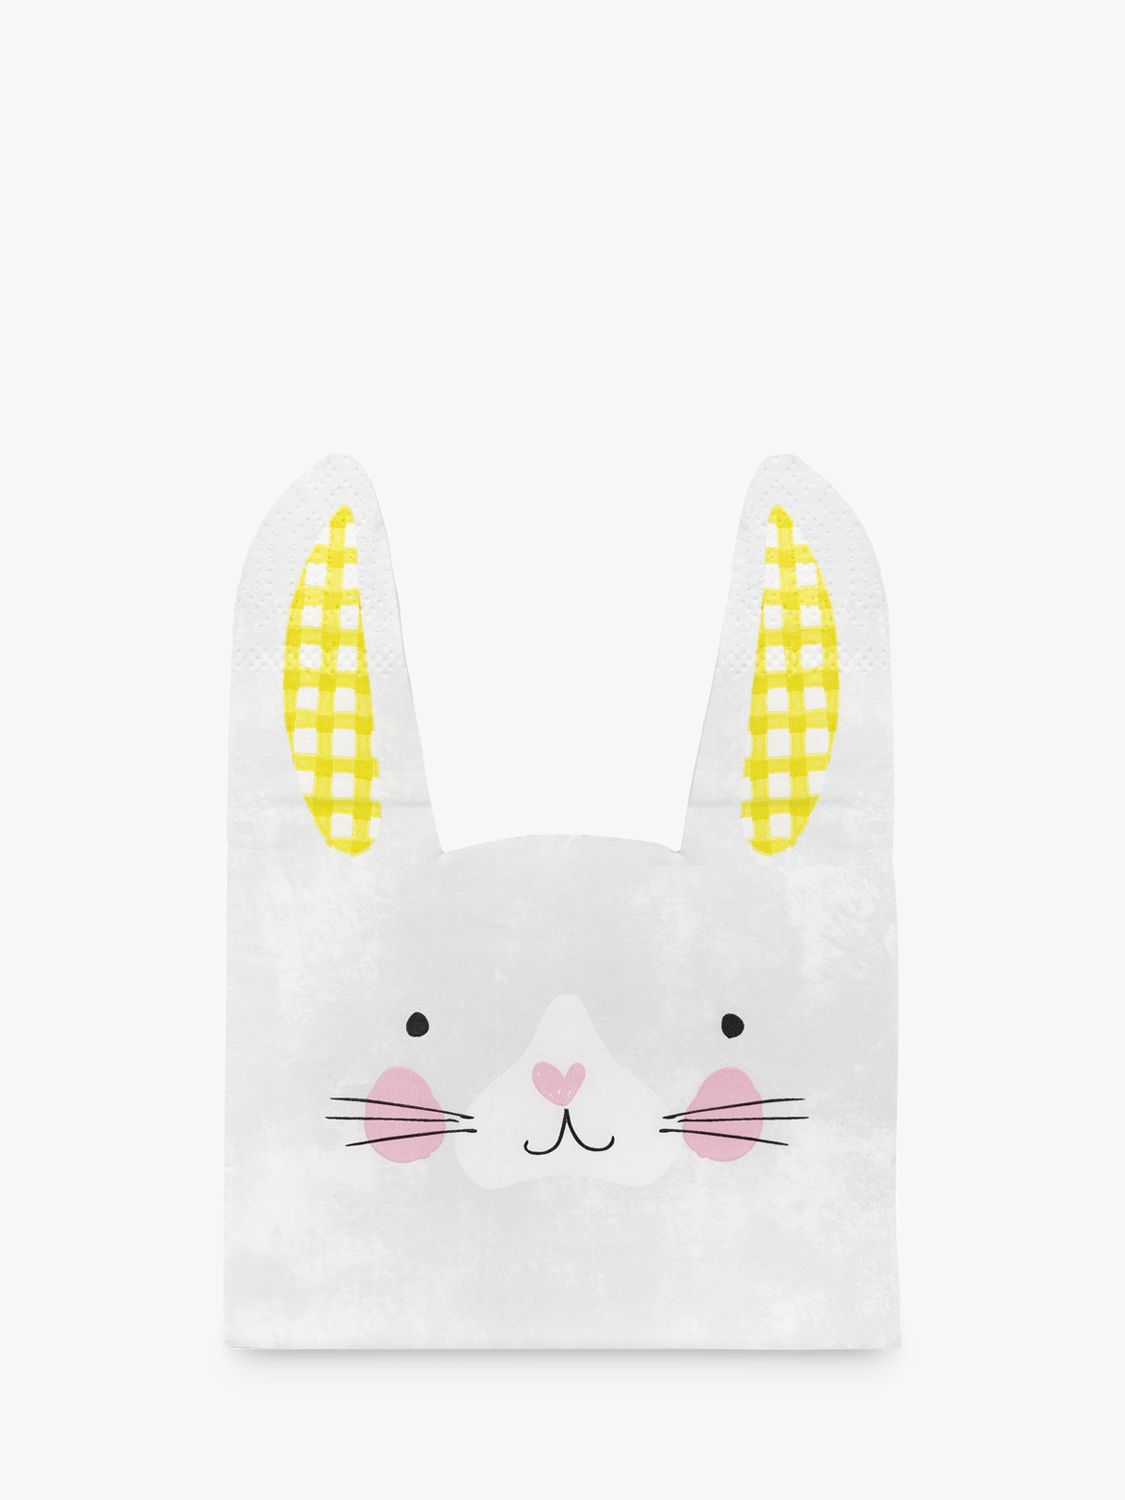 Talking Tables Bunny Shaped Paper Napkins, Multi, Pack of 20 £5.00